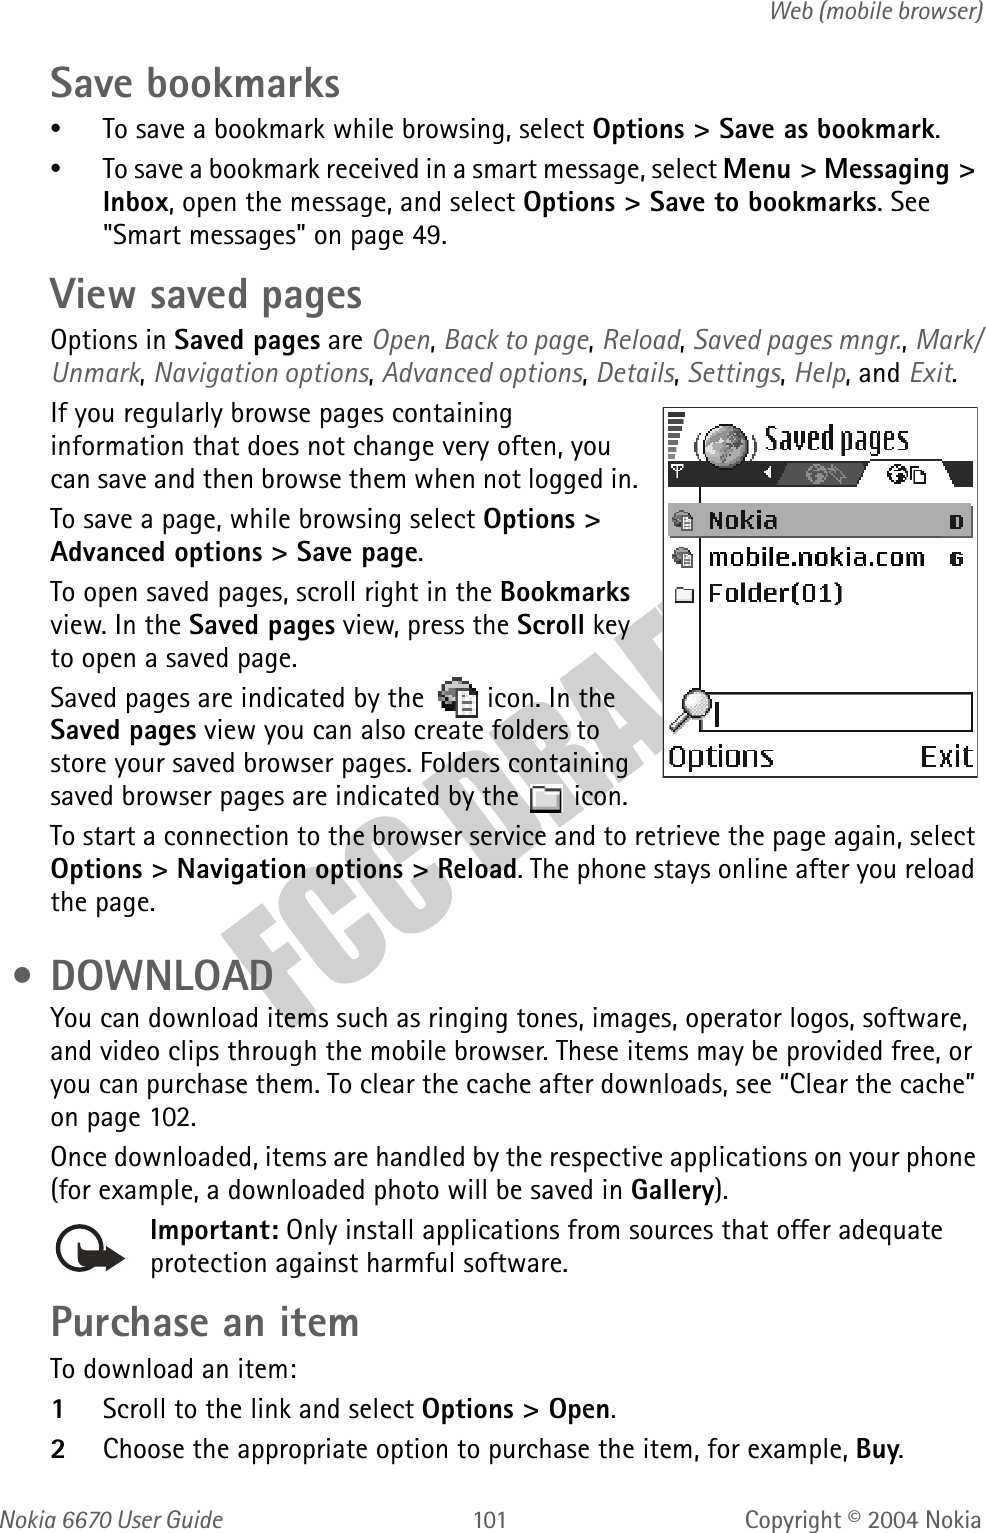 Nokia  User Guide  Copyright © 2004 NokiaWeb (mobile browser)Save bookmarks•To save a bookmark while browsing, select Options &gt; Save as bookmark.•To save a bookmark received in a smart message, select Menu &gt; Messaging &gt; Inbox, open the message, and select Options &gt; Save to bookmarks. See &quot;Smart messages&quot; on page 49. View saved pagesOptions in Saved pages are Open, Back to page, Reload, Saved pages mngr., Mark/Unmark, Navigation options, Advanced options, Details, Settings, Help, and Exit.If you regularly browse pages containing information that does not change very often, you can save and then browse them when not logged in.To save a page, while browsing select Options &gt; Advanced options &gt; Save page.To open saved pages, scroll right in the Bookmarks view. In the Saved pages view, press the Scroll key to open a saved page. Saved pages are indicated by the   icon. In the Saved pages view you can also create folders to store your saved browser pages. Folders containing saved browser pages are indicated by the   icon.To start a connection to the browser service and to retrieve the page again, select Options &gt; Navigation options &gt; Reload. The phone stays online after you reload the page. • DOWNLOADYou can download items such as ringing tones, images, operator logos, software, and video clips through the mobile browser. These items may be provided free, or you can purchase them. To clear the cache after downloads, see “Clear the cache” on page 102.Once downloaded, items are handled by the respective applications on your phone (for example, a downloaded photo will be saved in Gallery).Important: Only install applications from sources that offer adequate protection against harmful software.Purchase an itemTo download an item:1Scroll to the link and select Options &gt; Open.2Choose the appropriate option to purchase the item, for example, Buy.